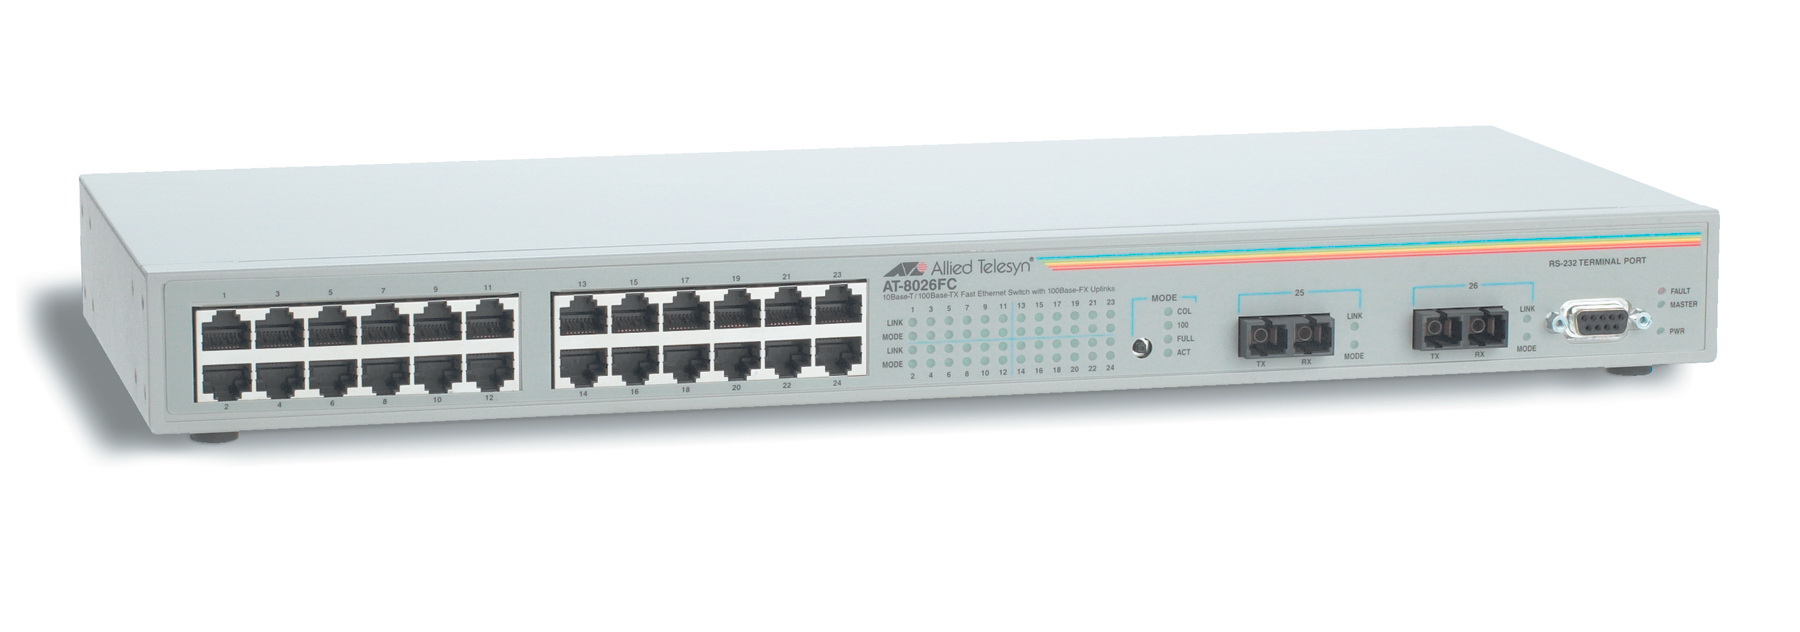 AT-8026FC Allied Telesis 24-Ports 10Base-T/ 100Base-TX Fast Ethernet Layer 2 Rack-mountable Managed Switch with 2x 100Base-FX Ports (Refurbished)